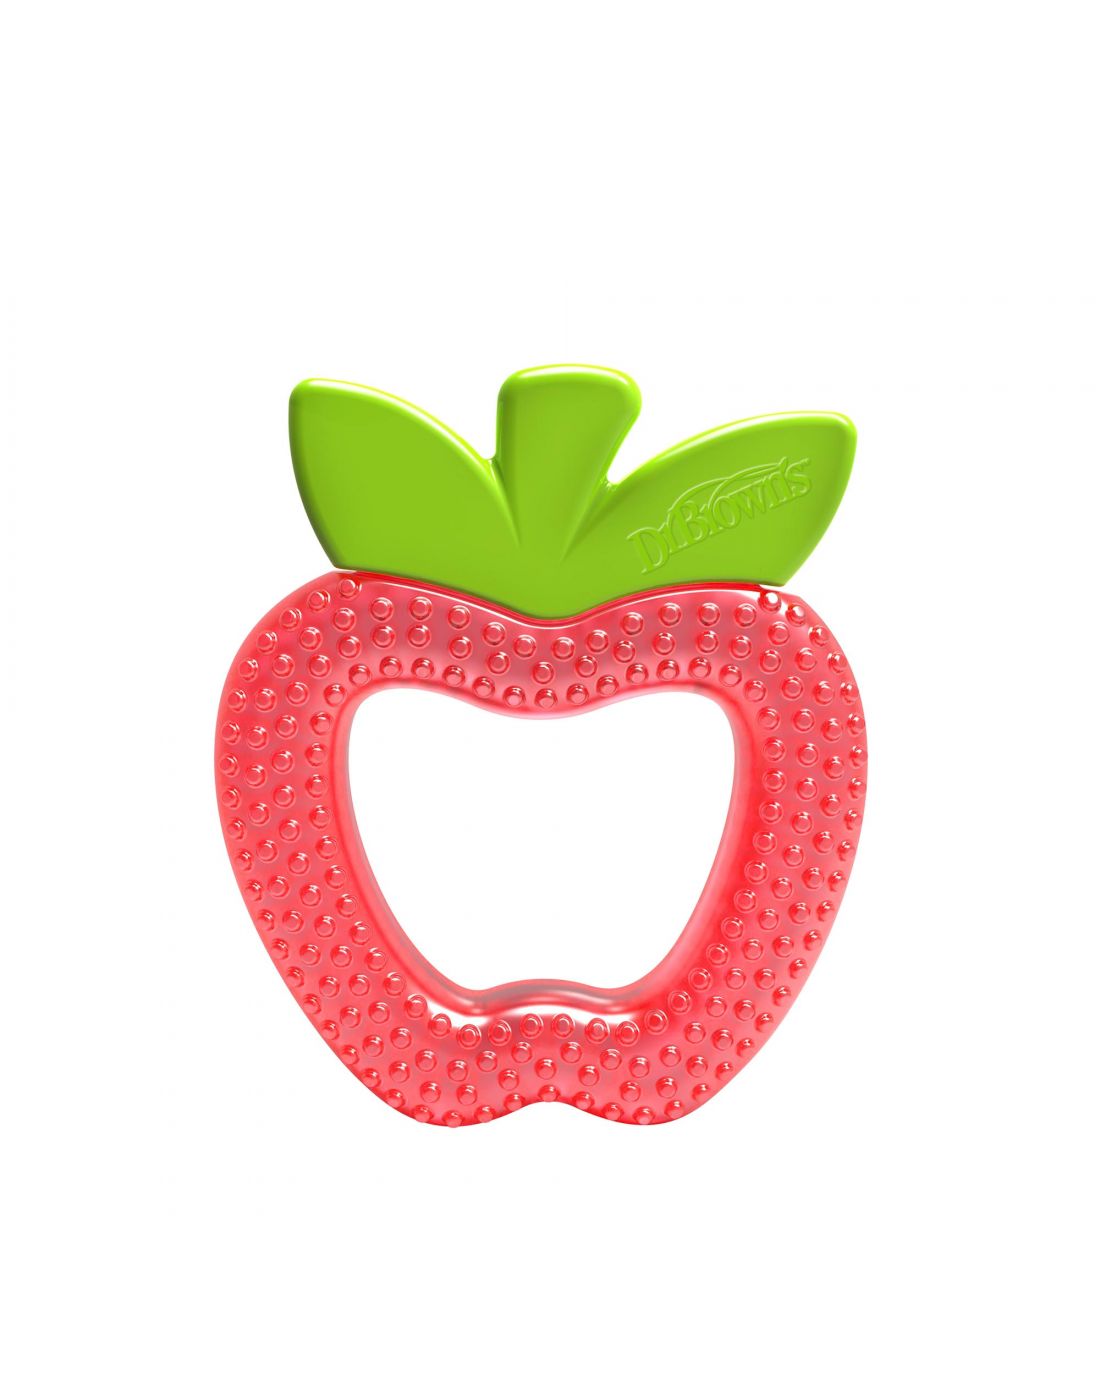 Dr.Brown's Cooling Apple Teething Ring
